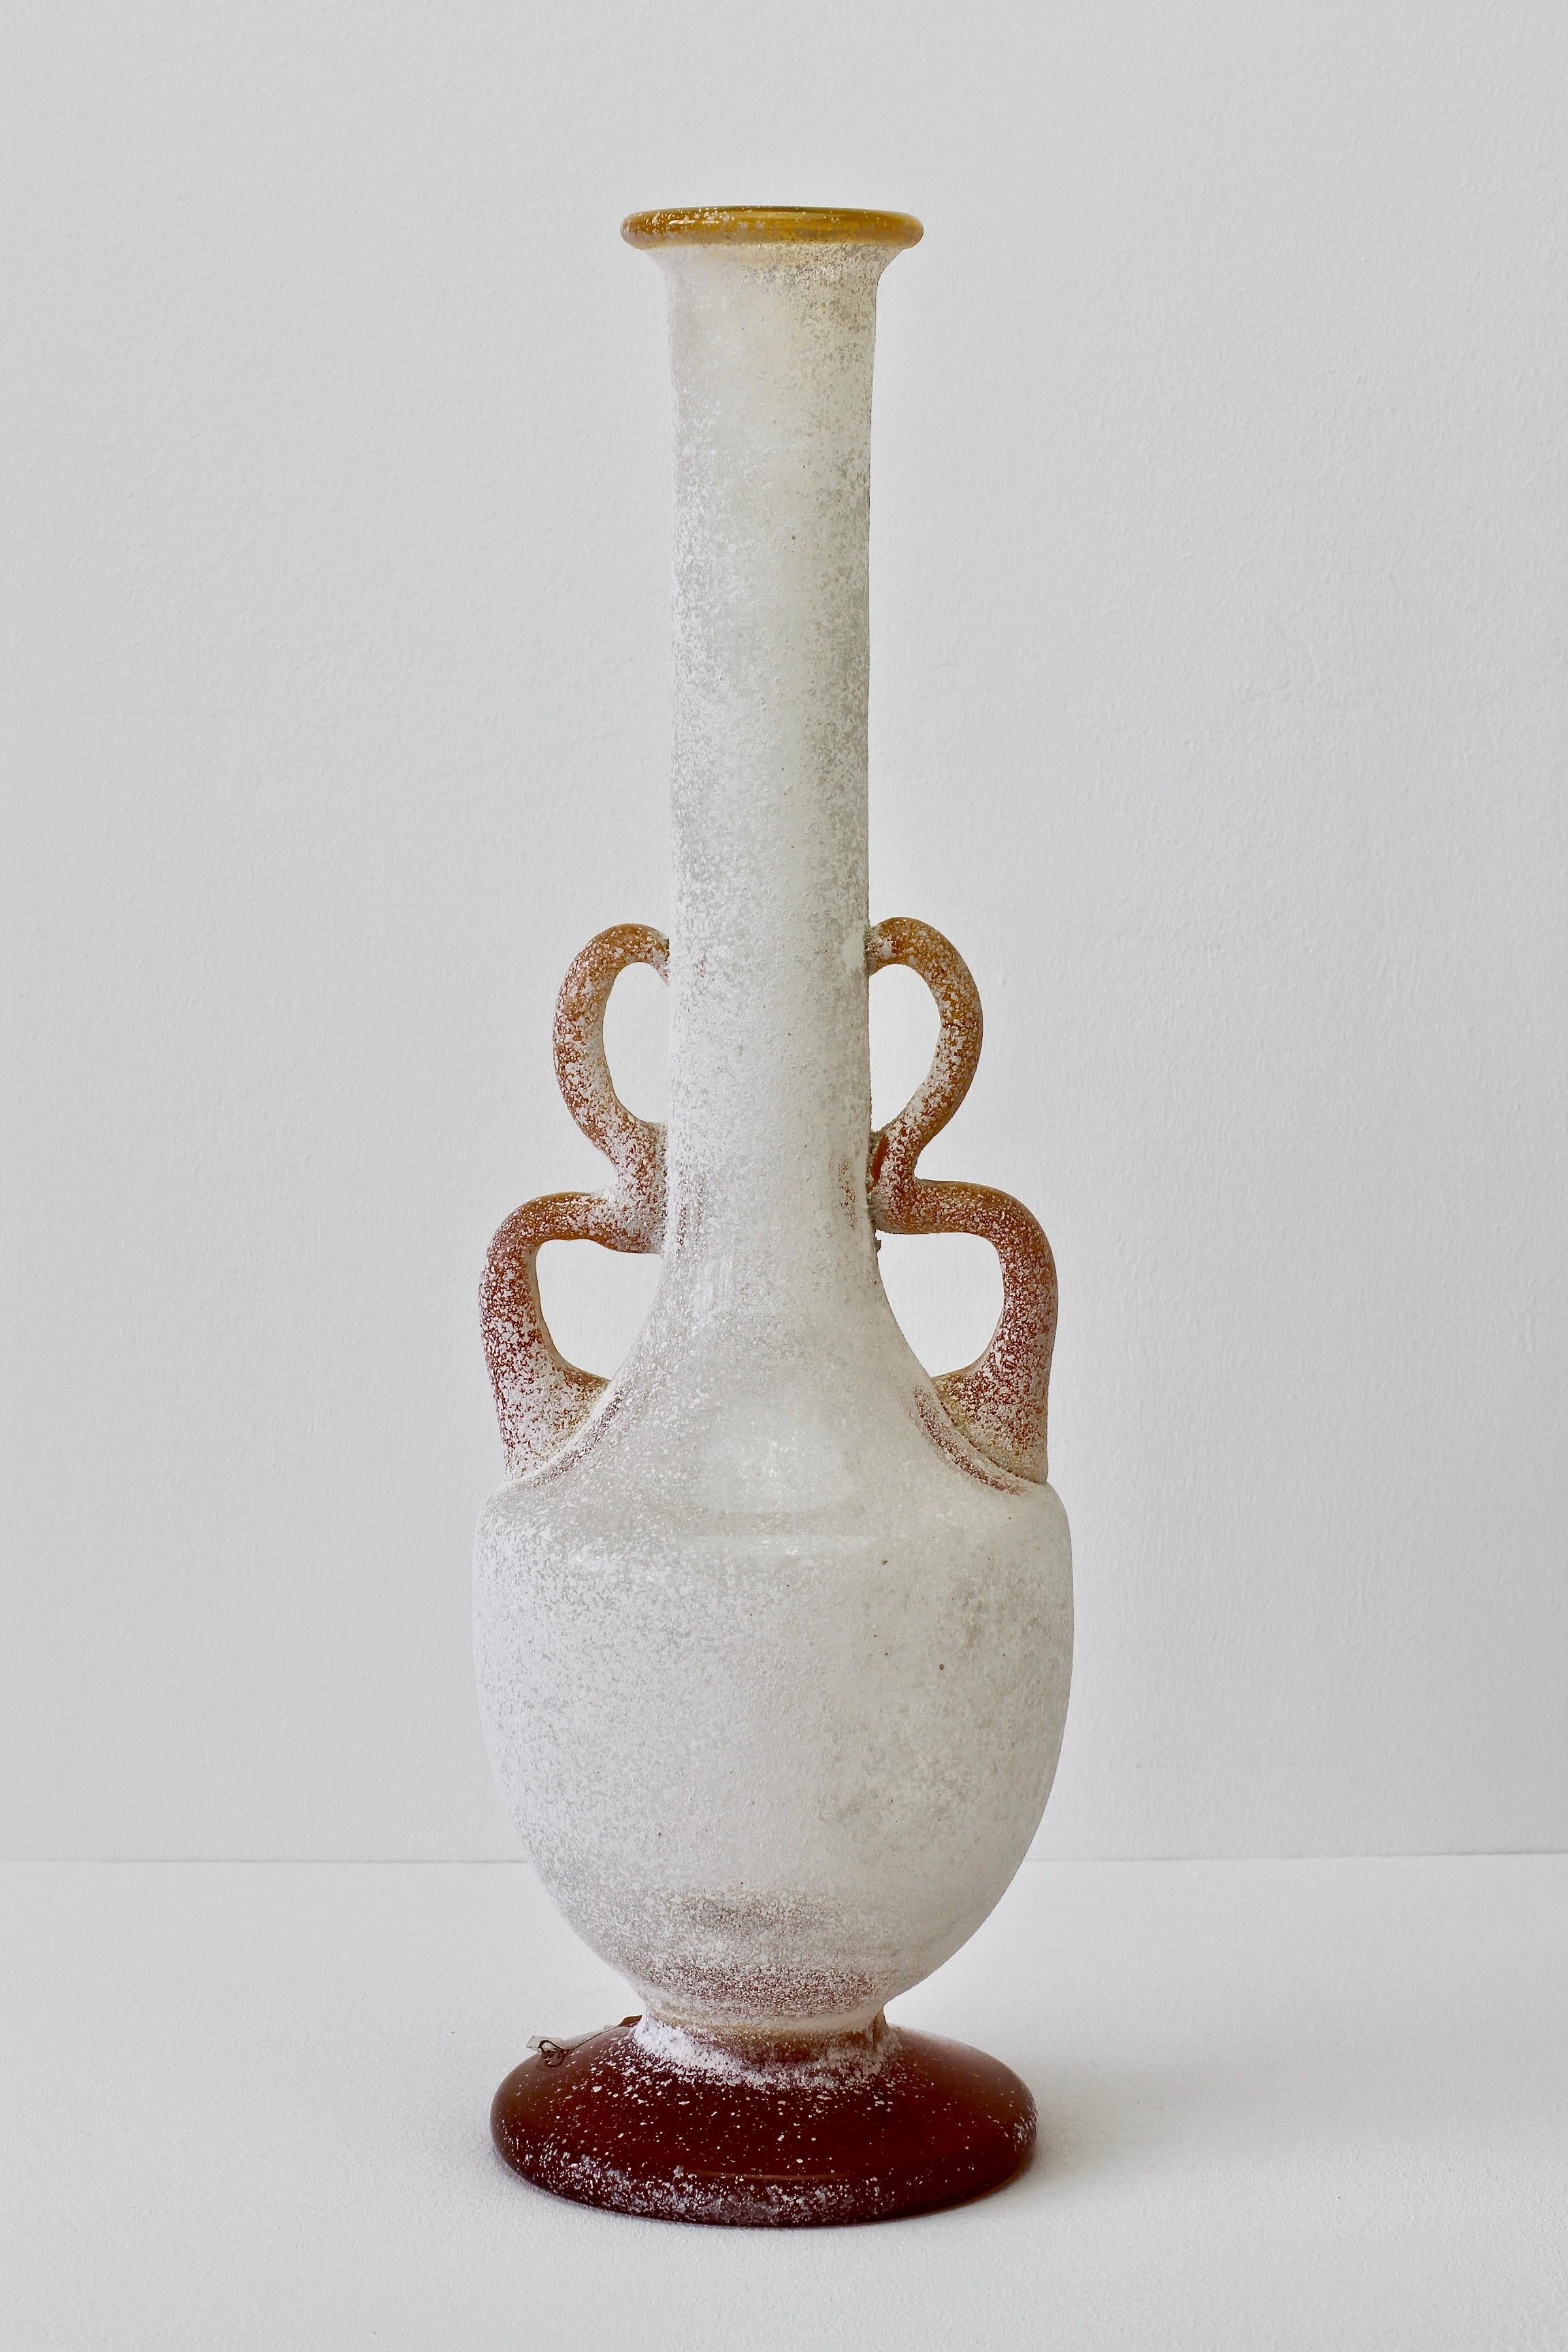 Large, long 'pencil' necked 'a Scavo' amber and white colored / coloured glass vase or vessel by Seguso Vetri d'Arte Murano, Italy. Elegant in form and showing extraordinary craftsmanship with the use of the 'Scavo' technique to replicate to look